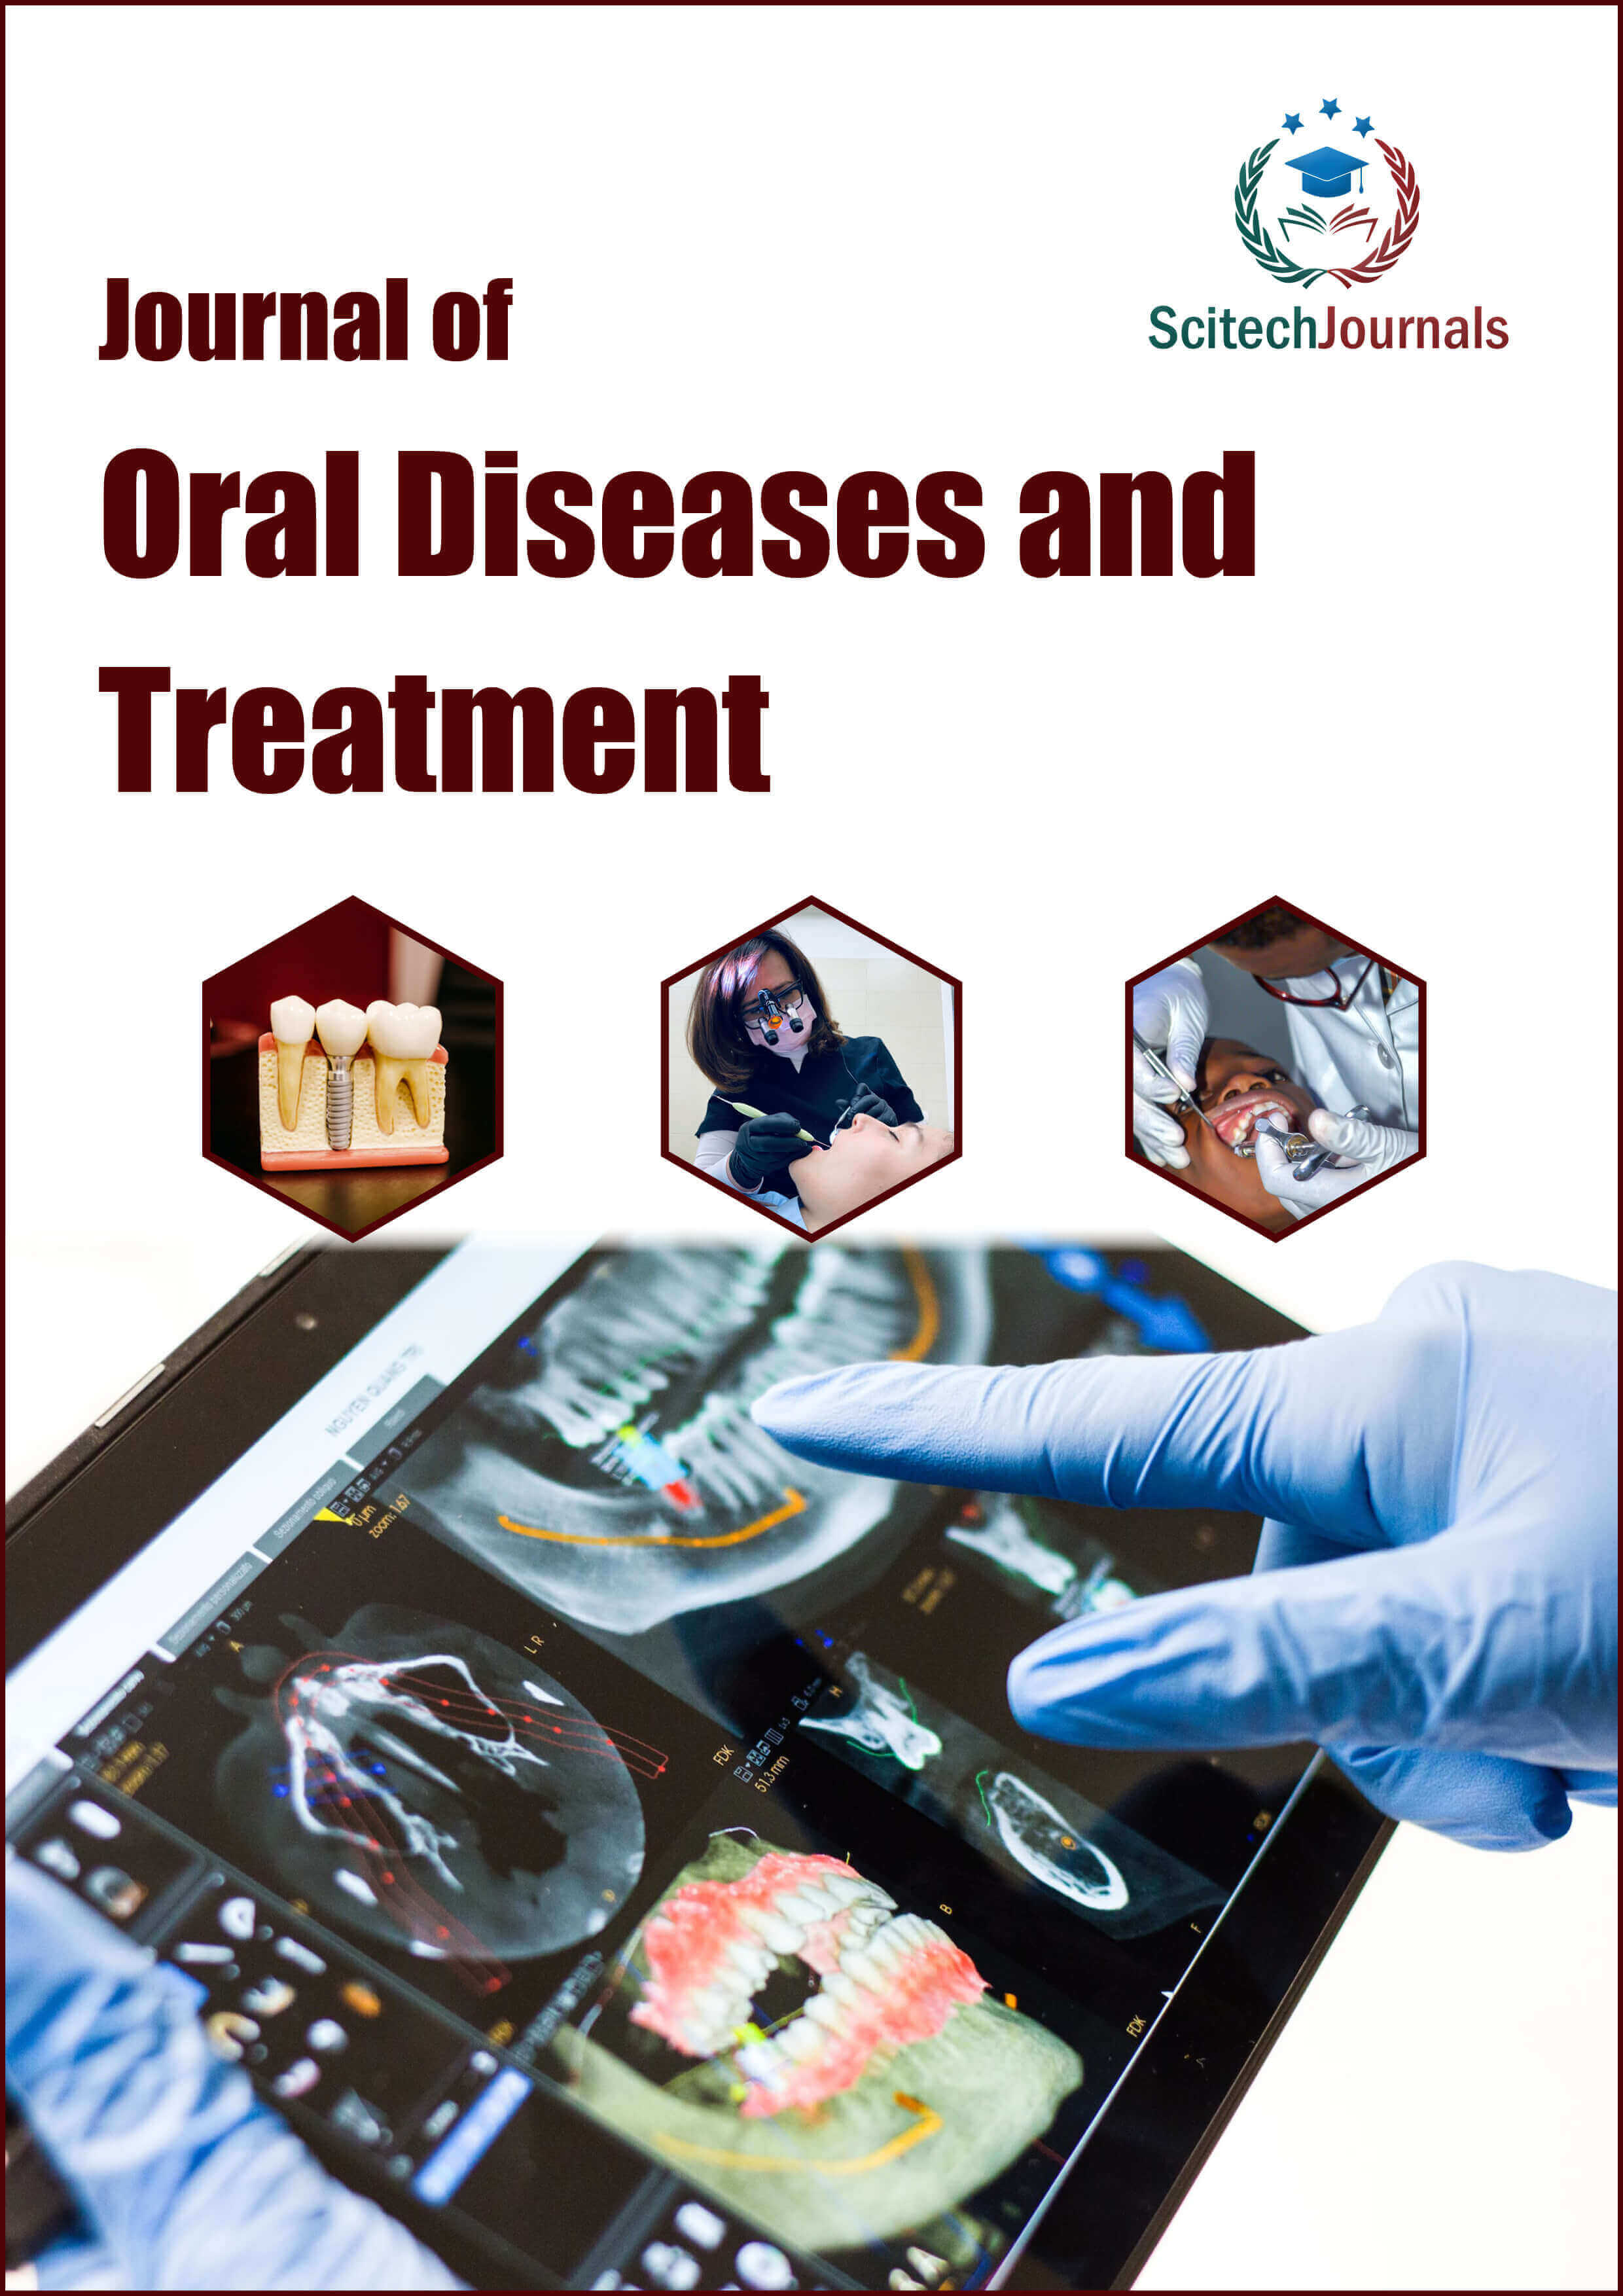 Journal of Oral Diseases and Treatment